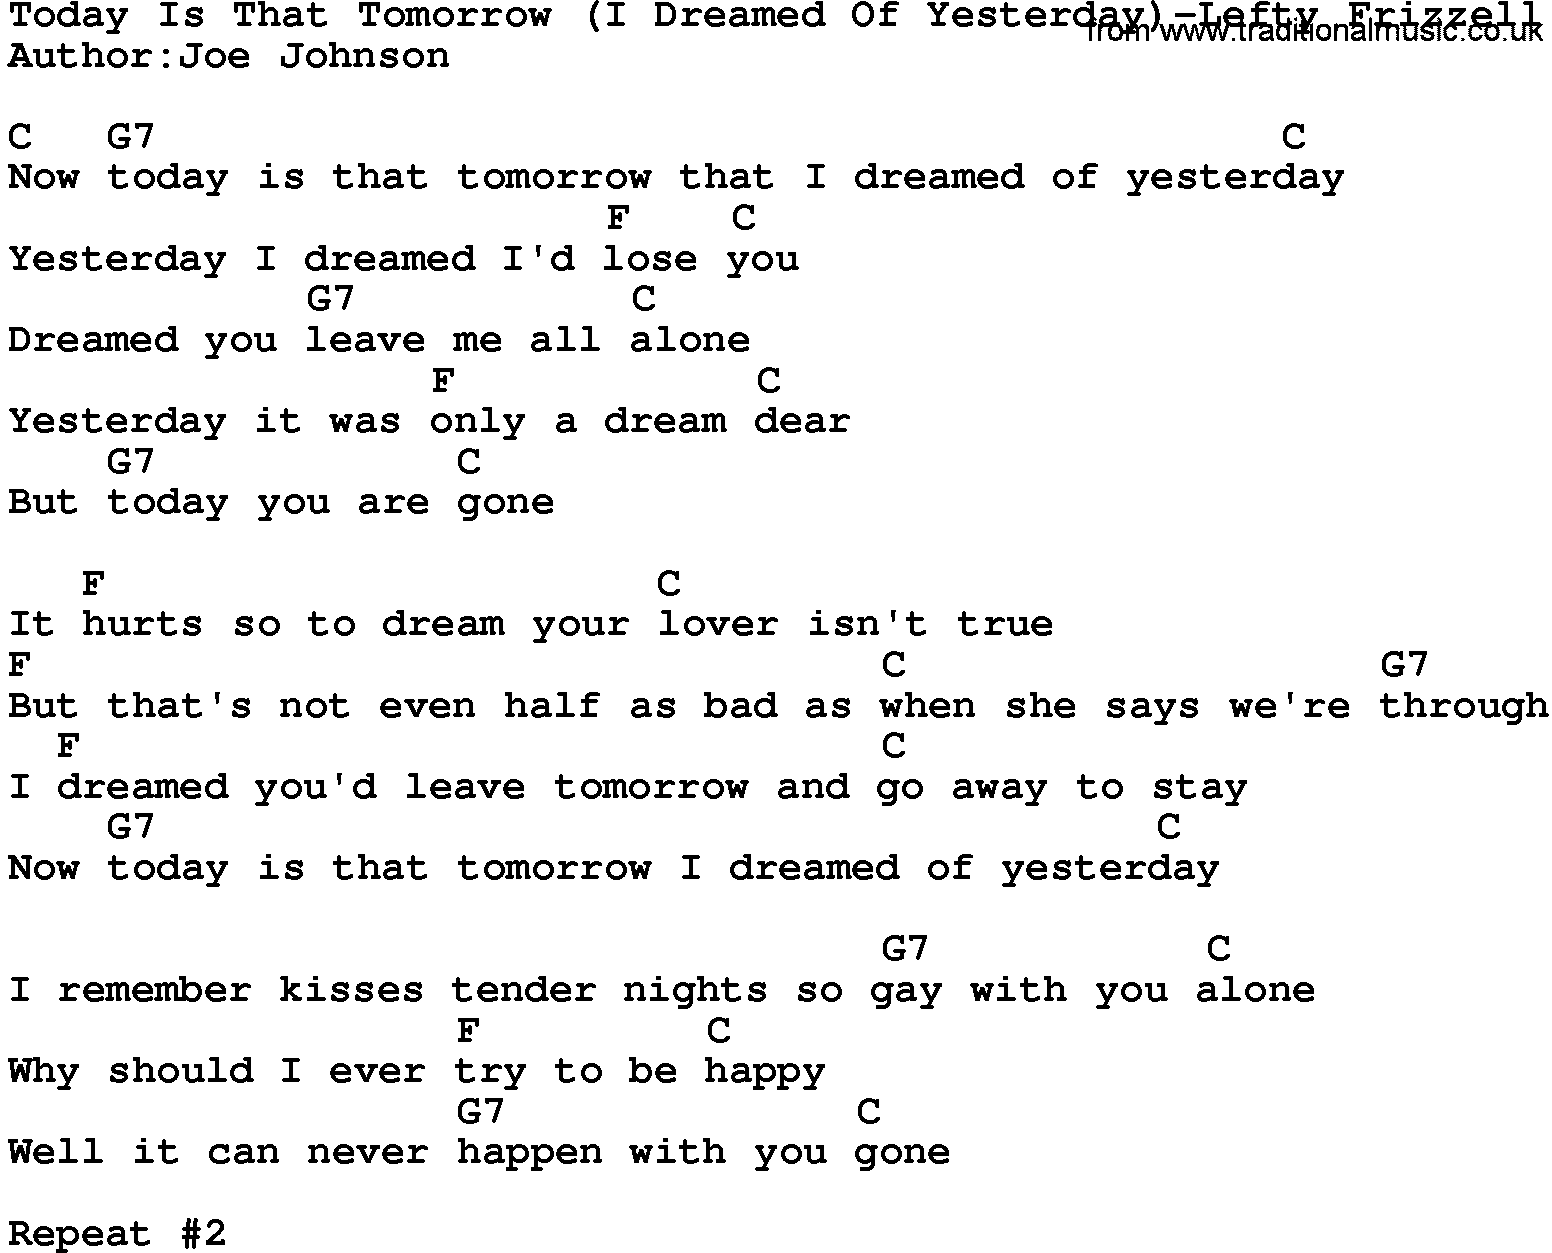 Country music song: Today Is That Tomorrow(I Dreamed Of Yesterday)-Lefty Frizzell lyrics and chords